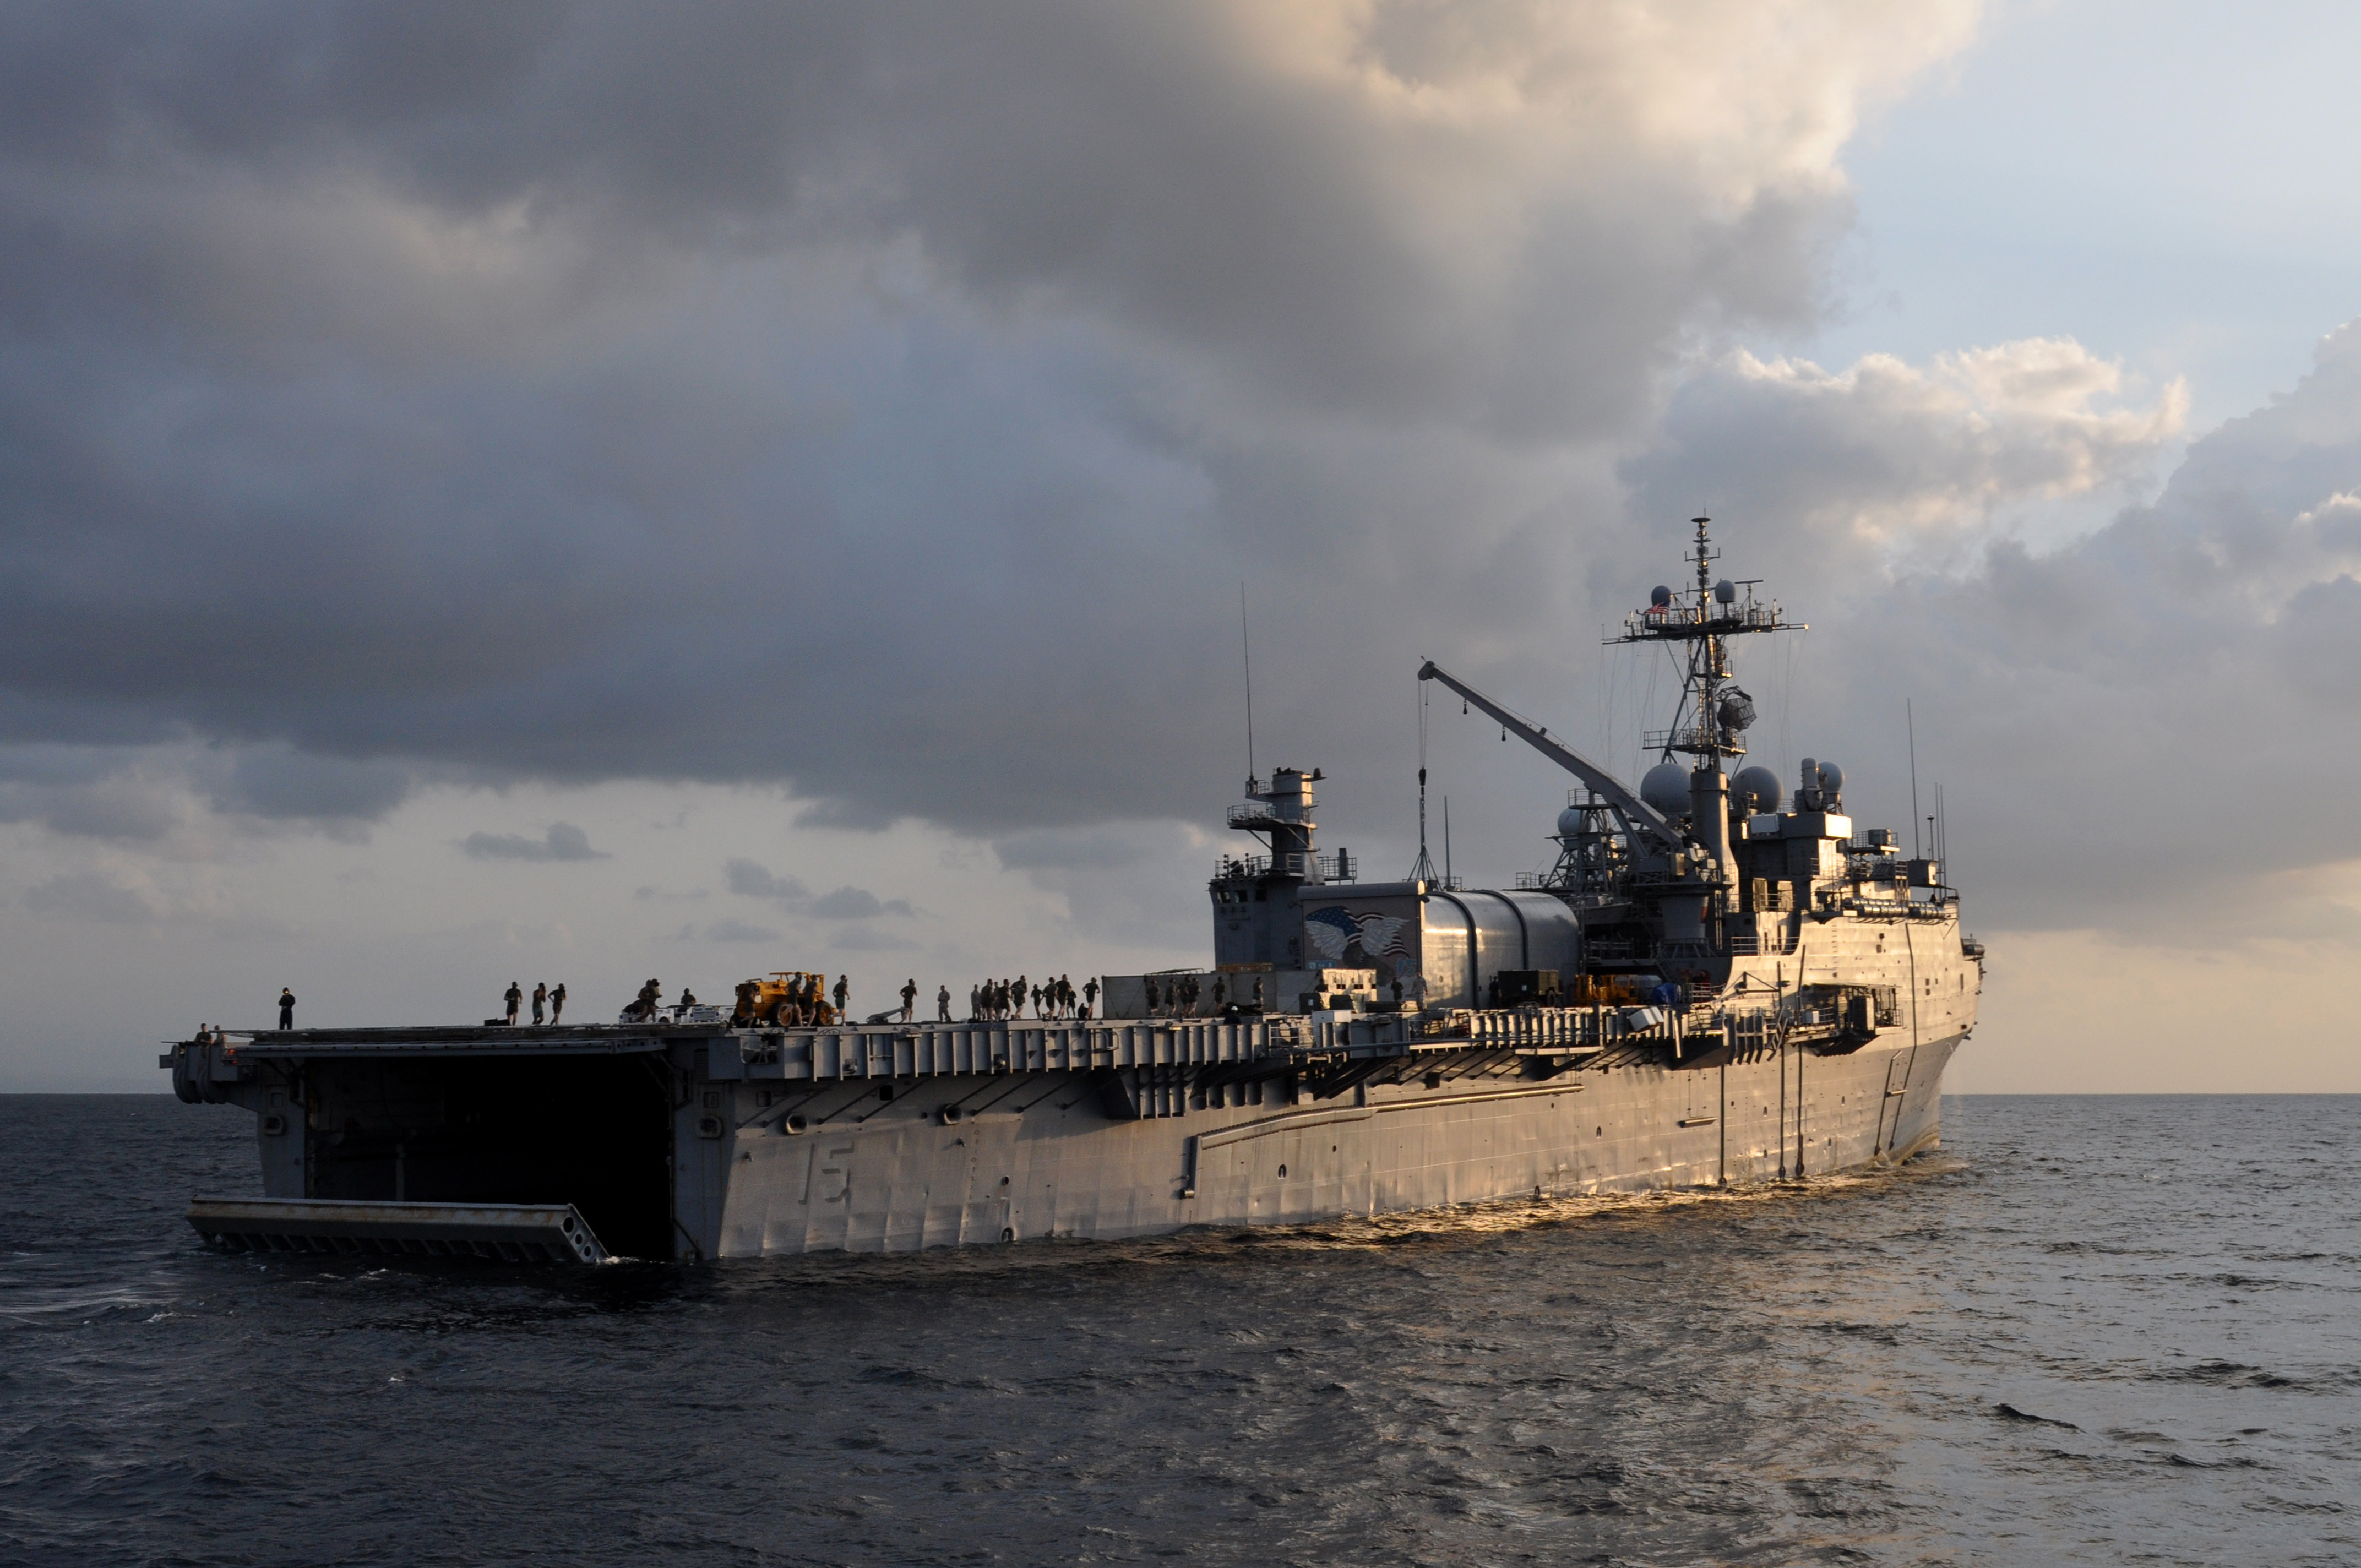 US_Navy_101029-N-7293M-083_The_amphibious_transport_dock_ship_USS_Ponce_%28LPD_15%29_is_lit_by_the_early_morning_sun_as_the_stern_gate_is_raised_after.jpg